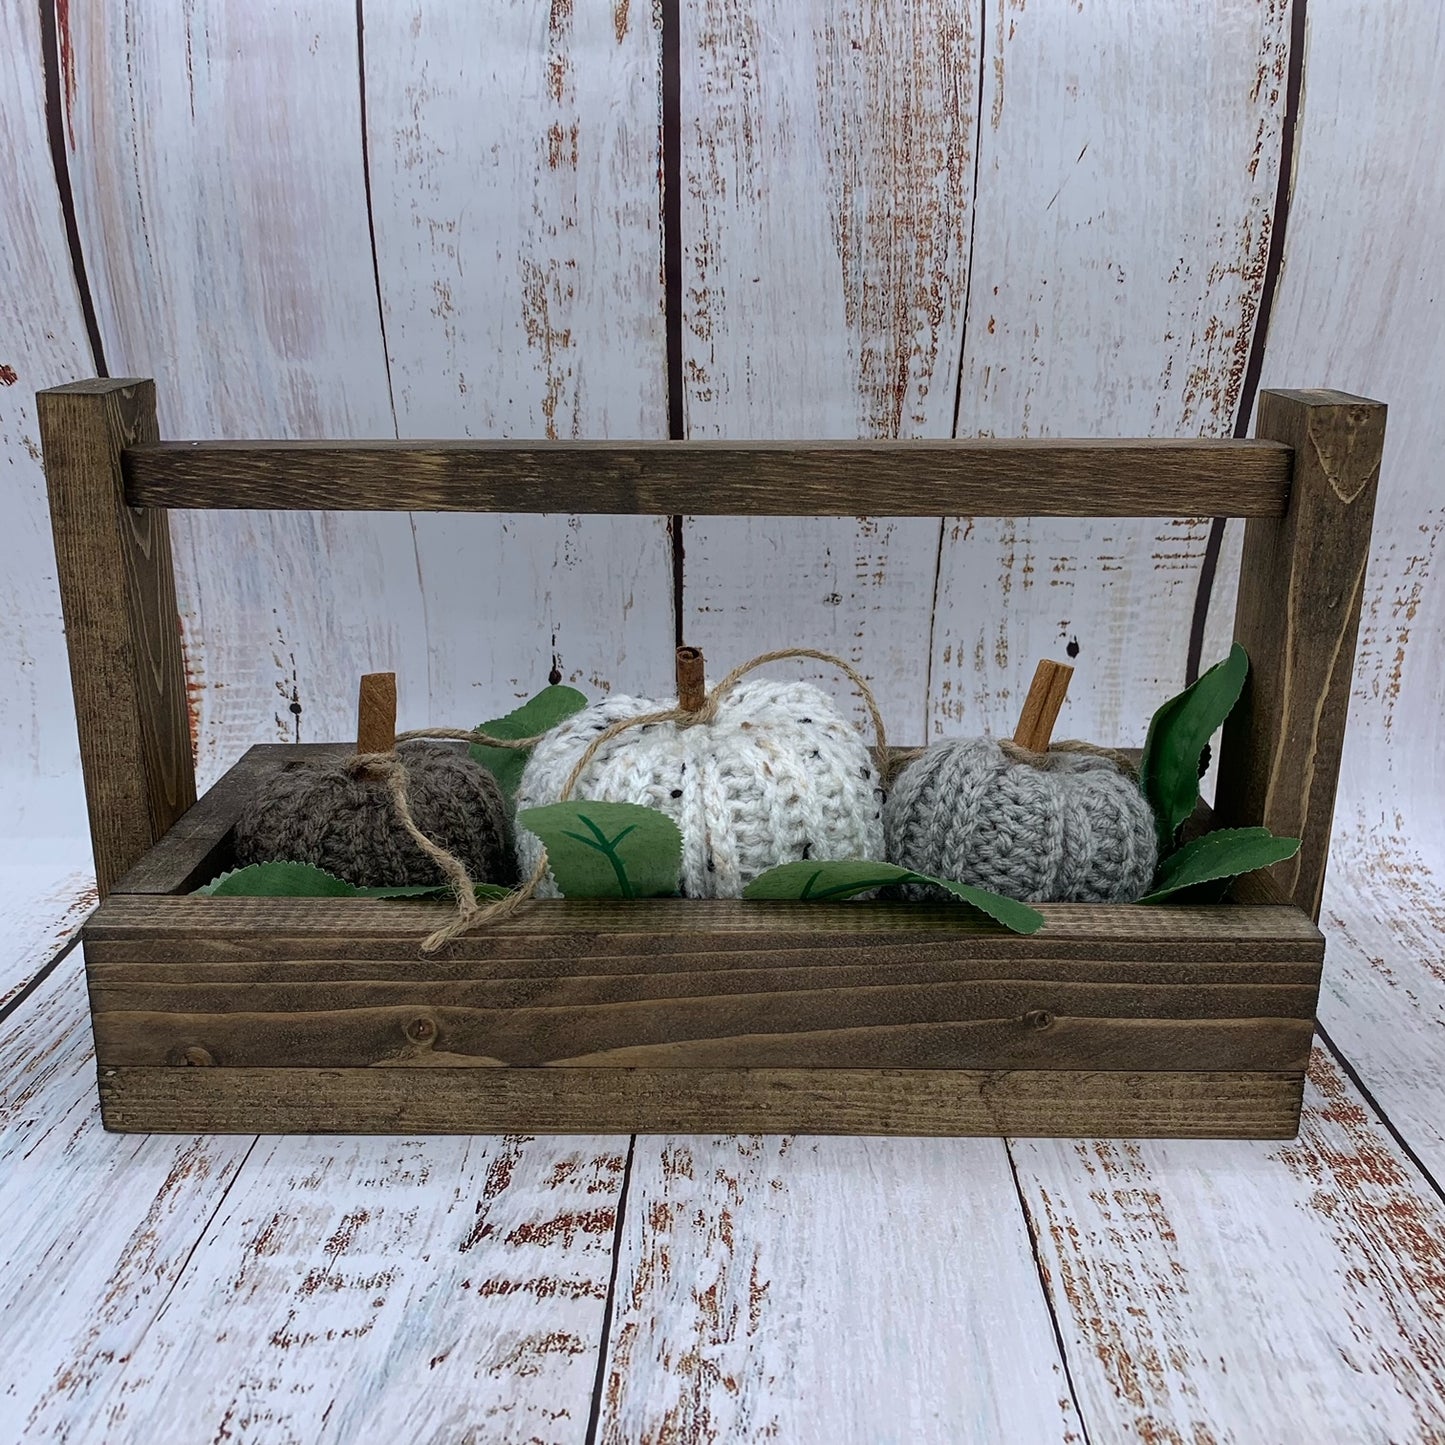 Crochet Pumpkin in Crate with Green Leaves